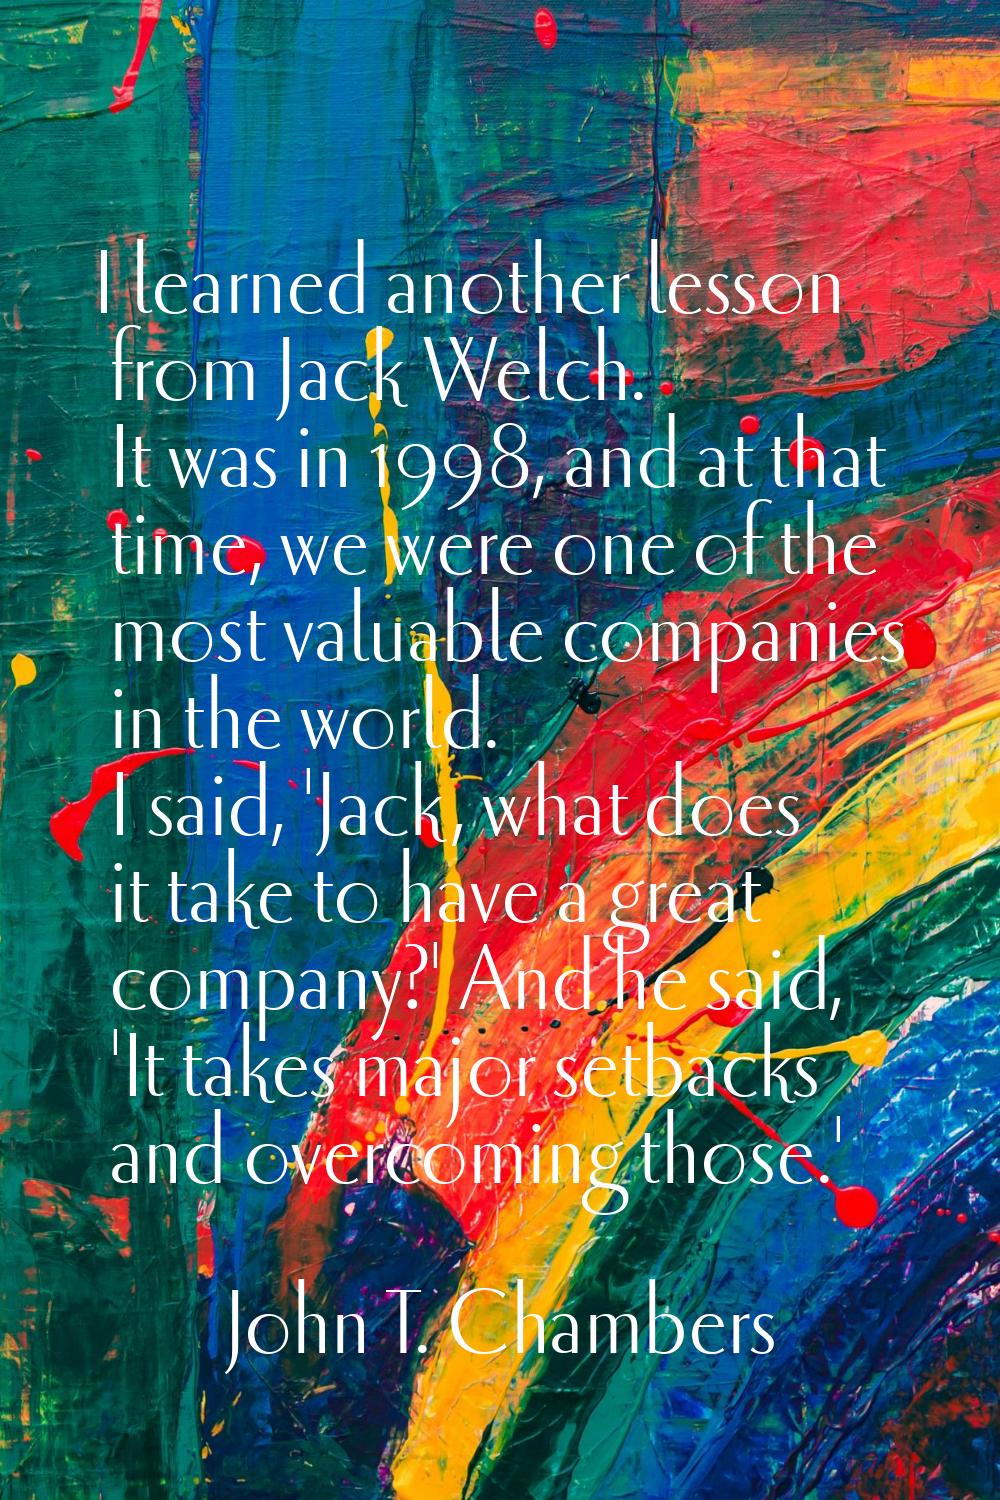 I learned another lesson from Jack Welch. It was in 1998, and at that time, we were one of the most